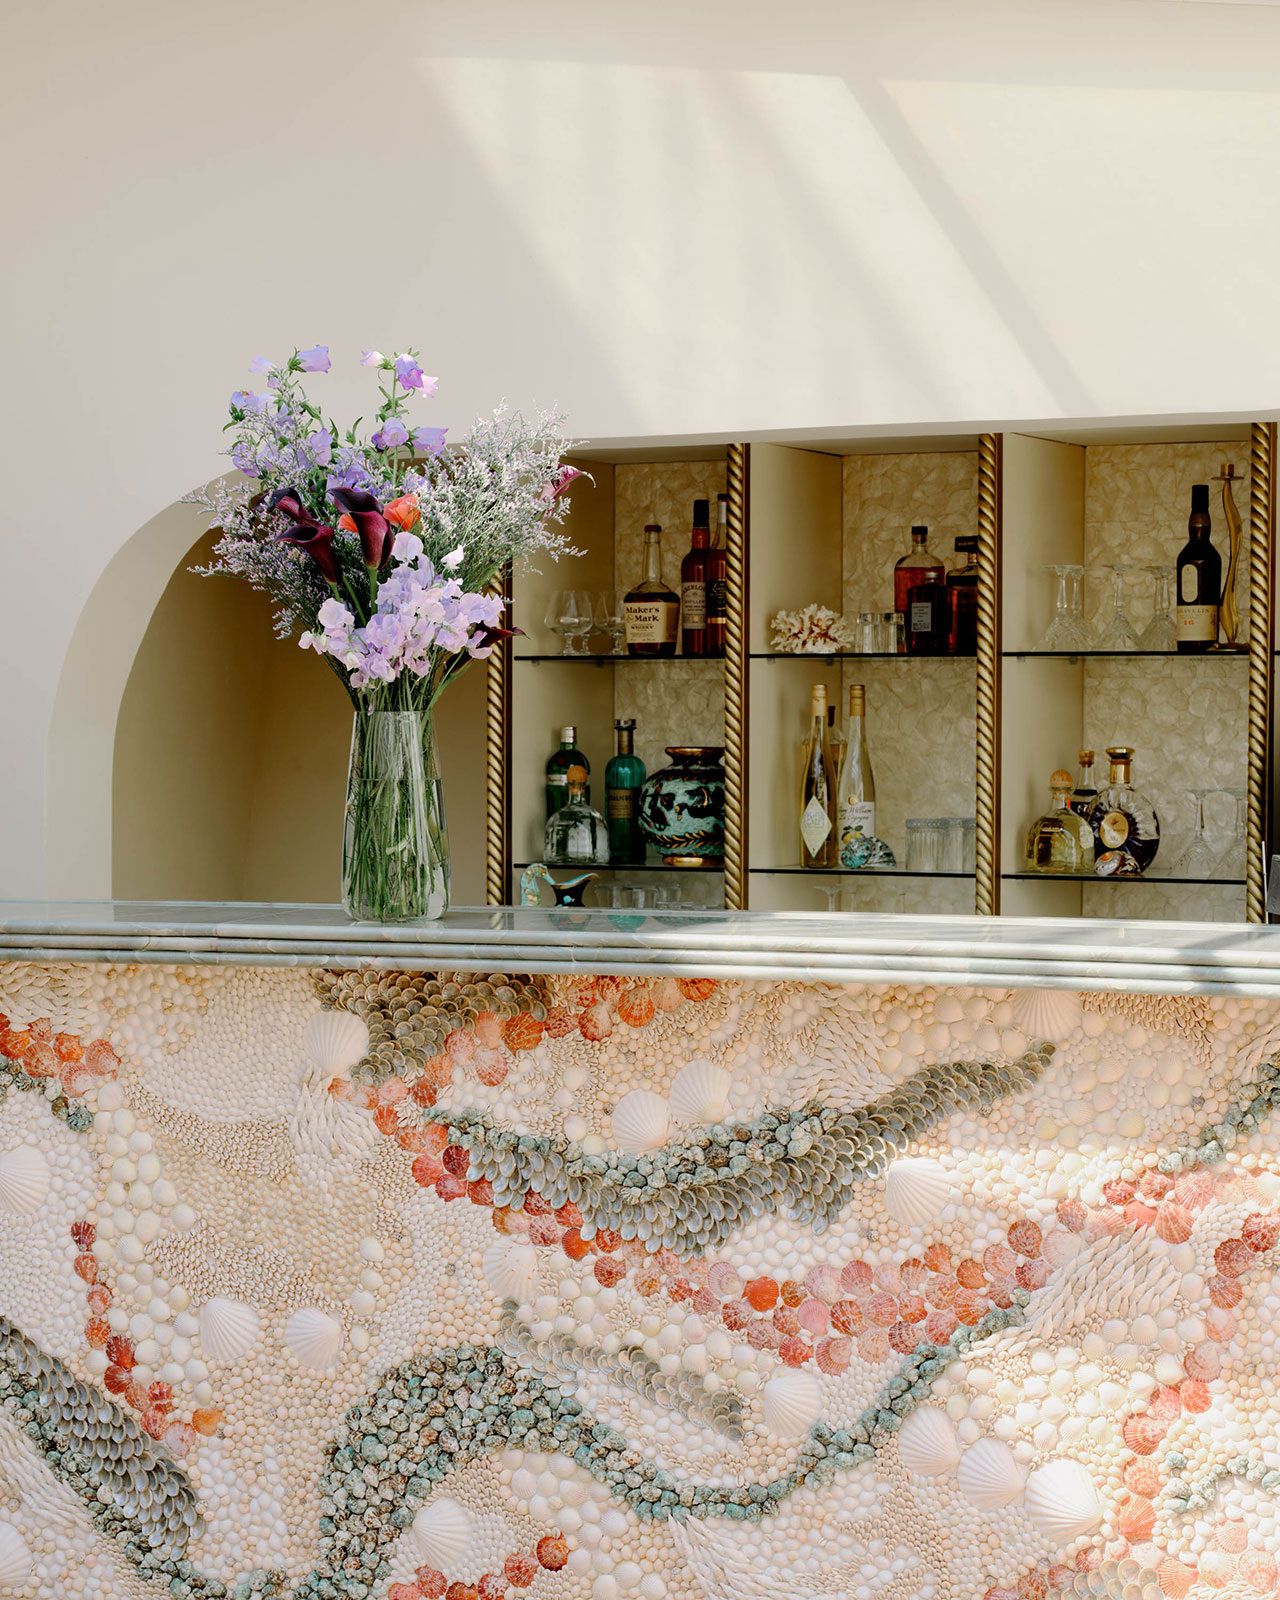 Seashell-adorned bar counter by Caroline Perrin. Photography by Christophe Coenon.